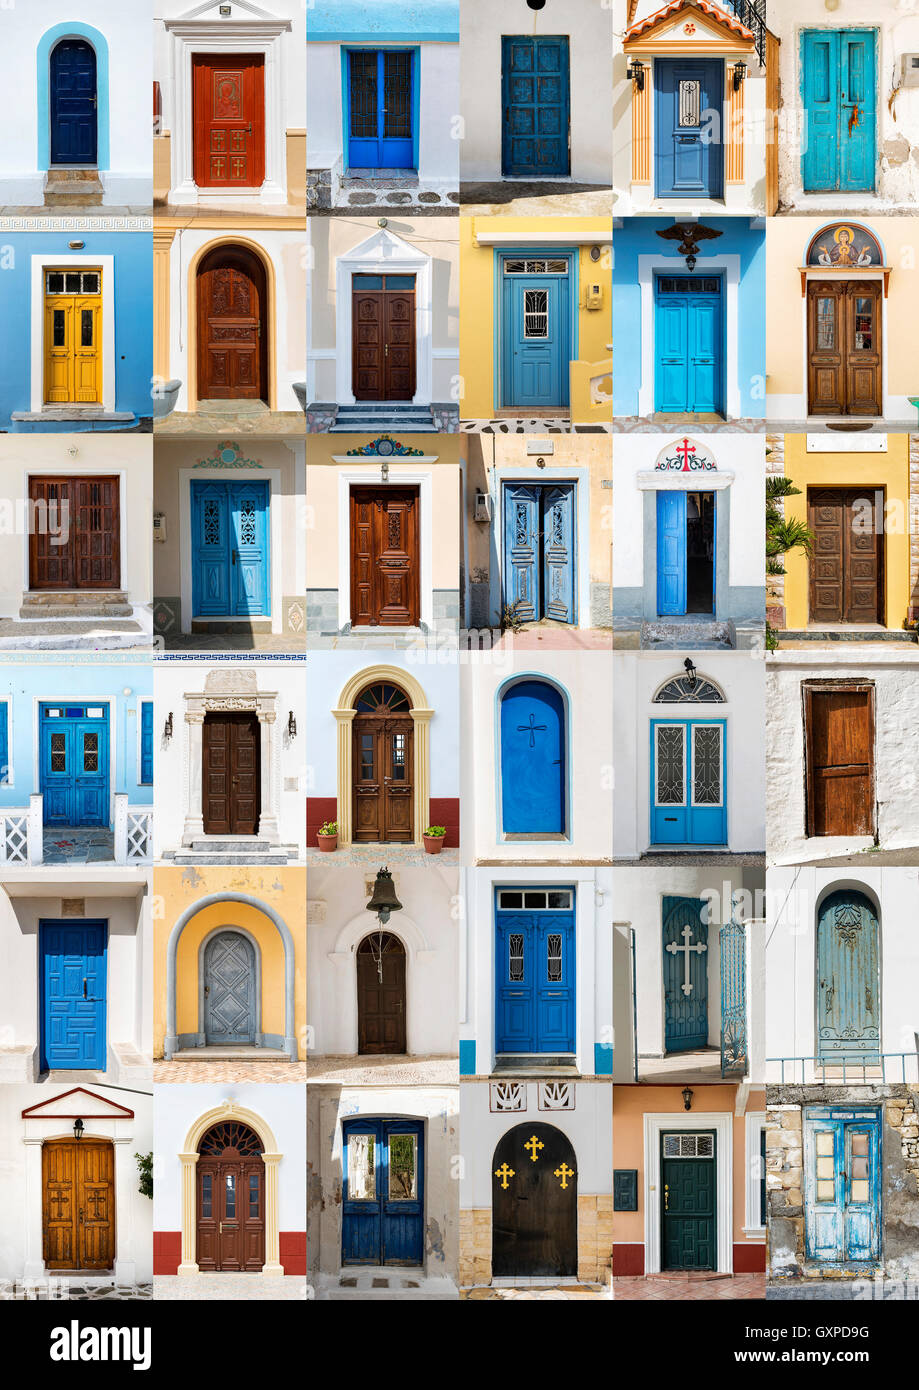 Photo collage of 36 colourful front doors to houses from Karpathos, Greece. Stock Photo